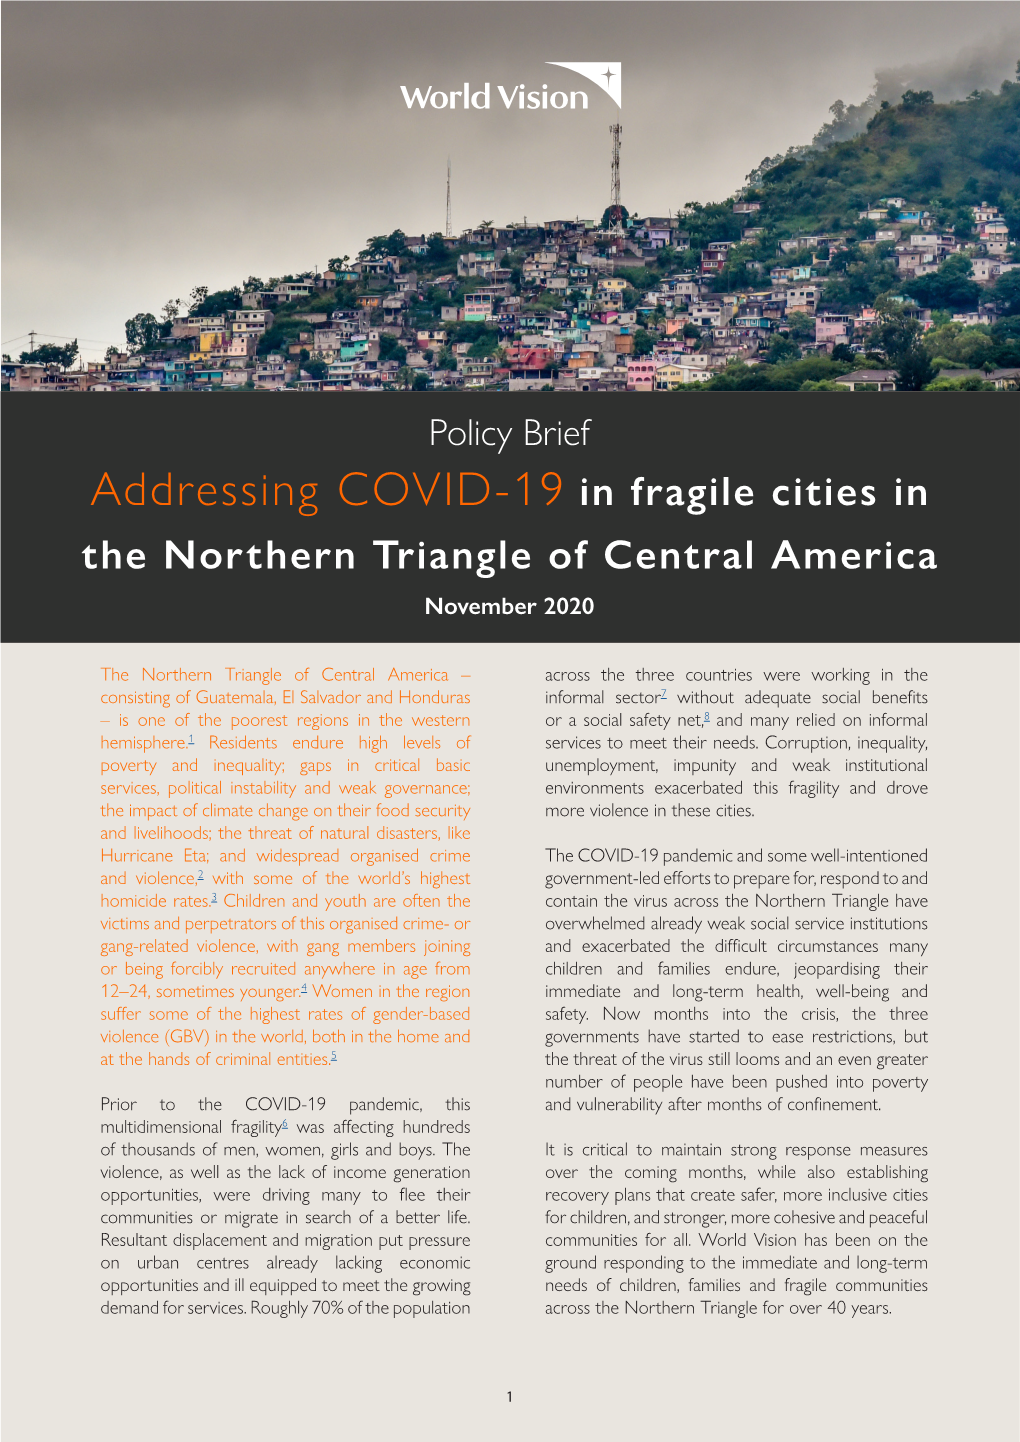 Addressing COVID-19 in Fragile Cities in the Northern Triangle of Central America November 2020